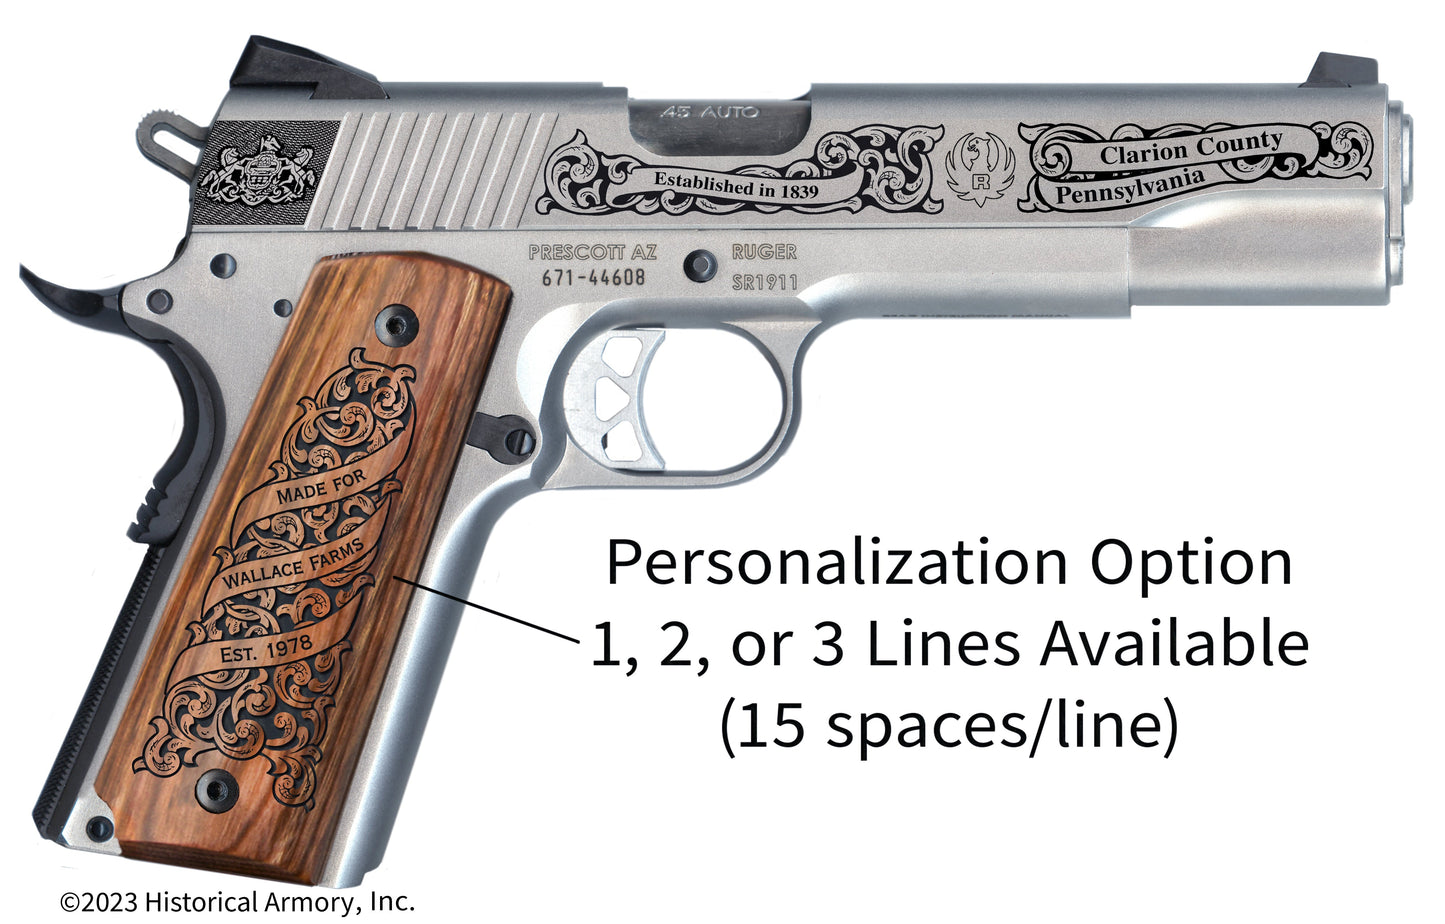 Clarion County Pennsylvania Personalized Engraved .45 Auto Ruger 1911